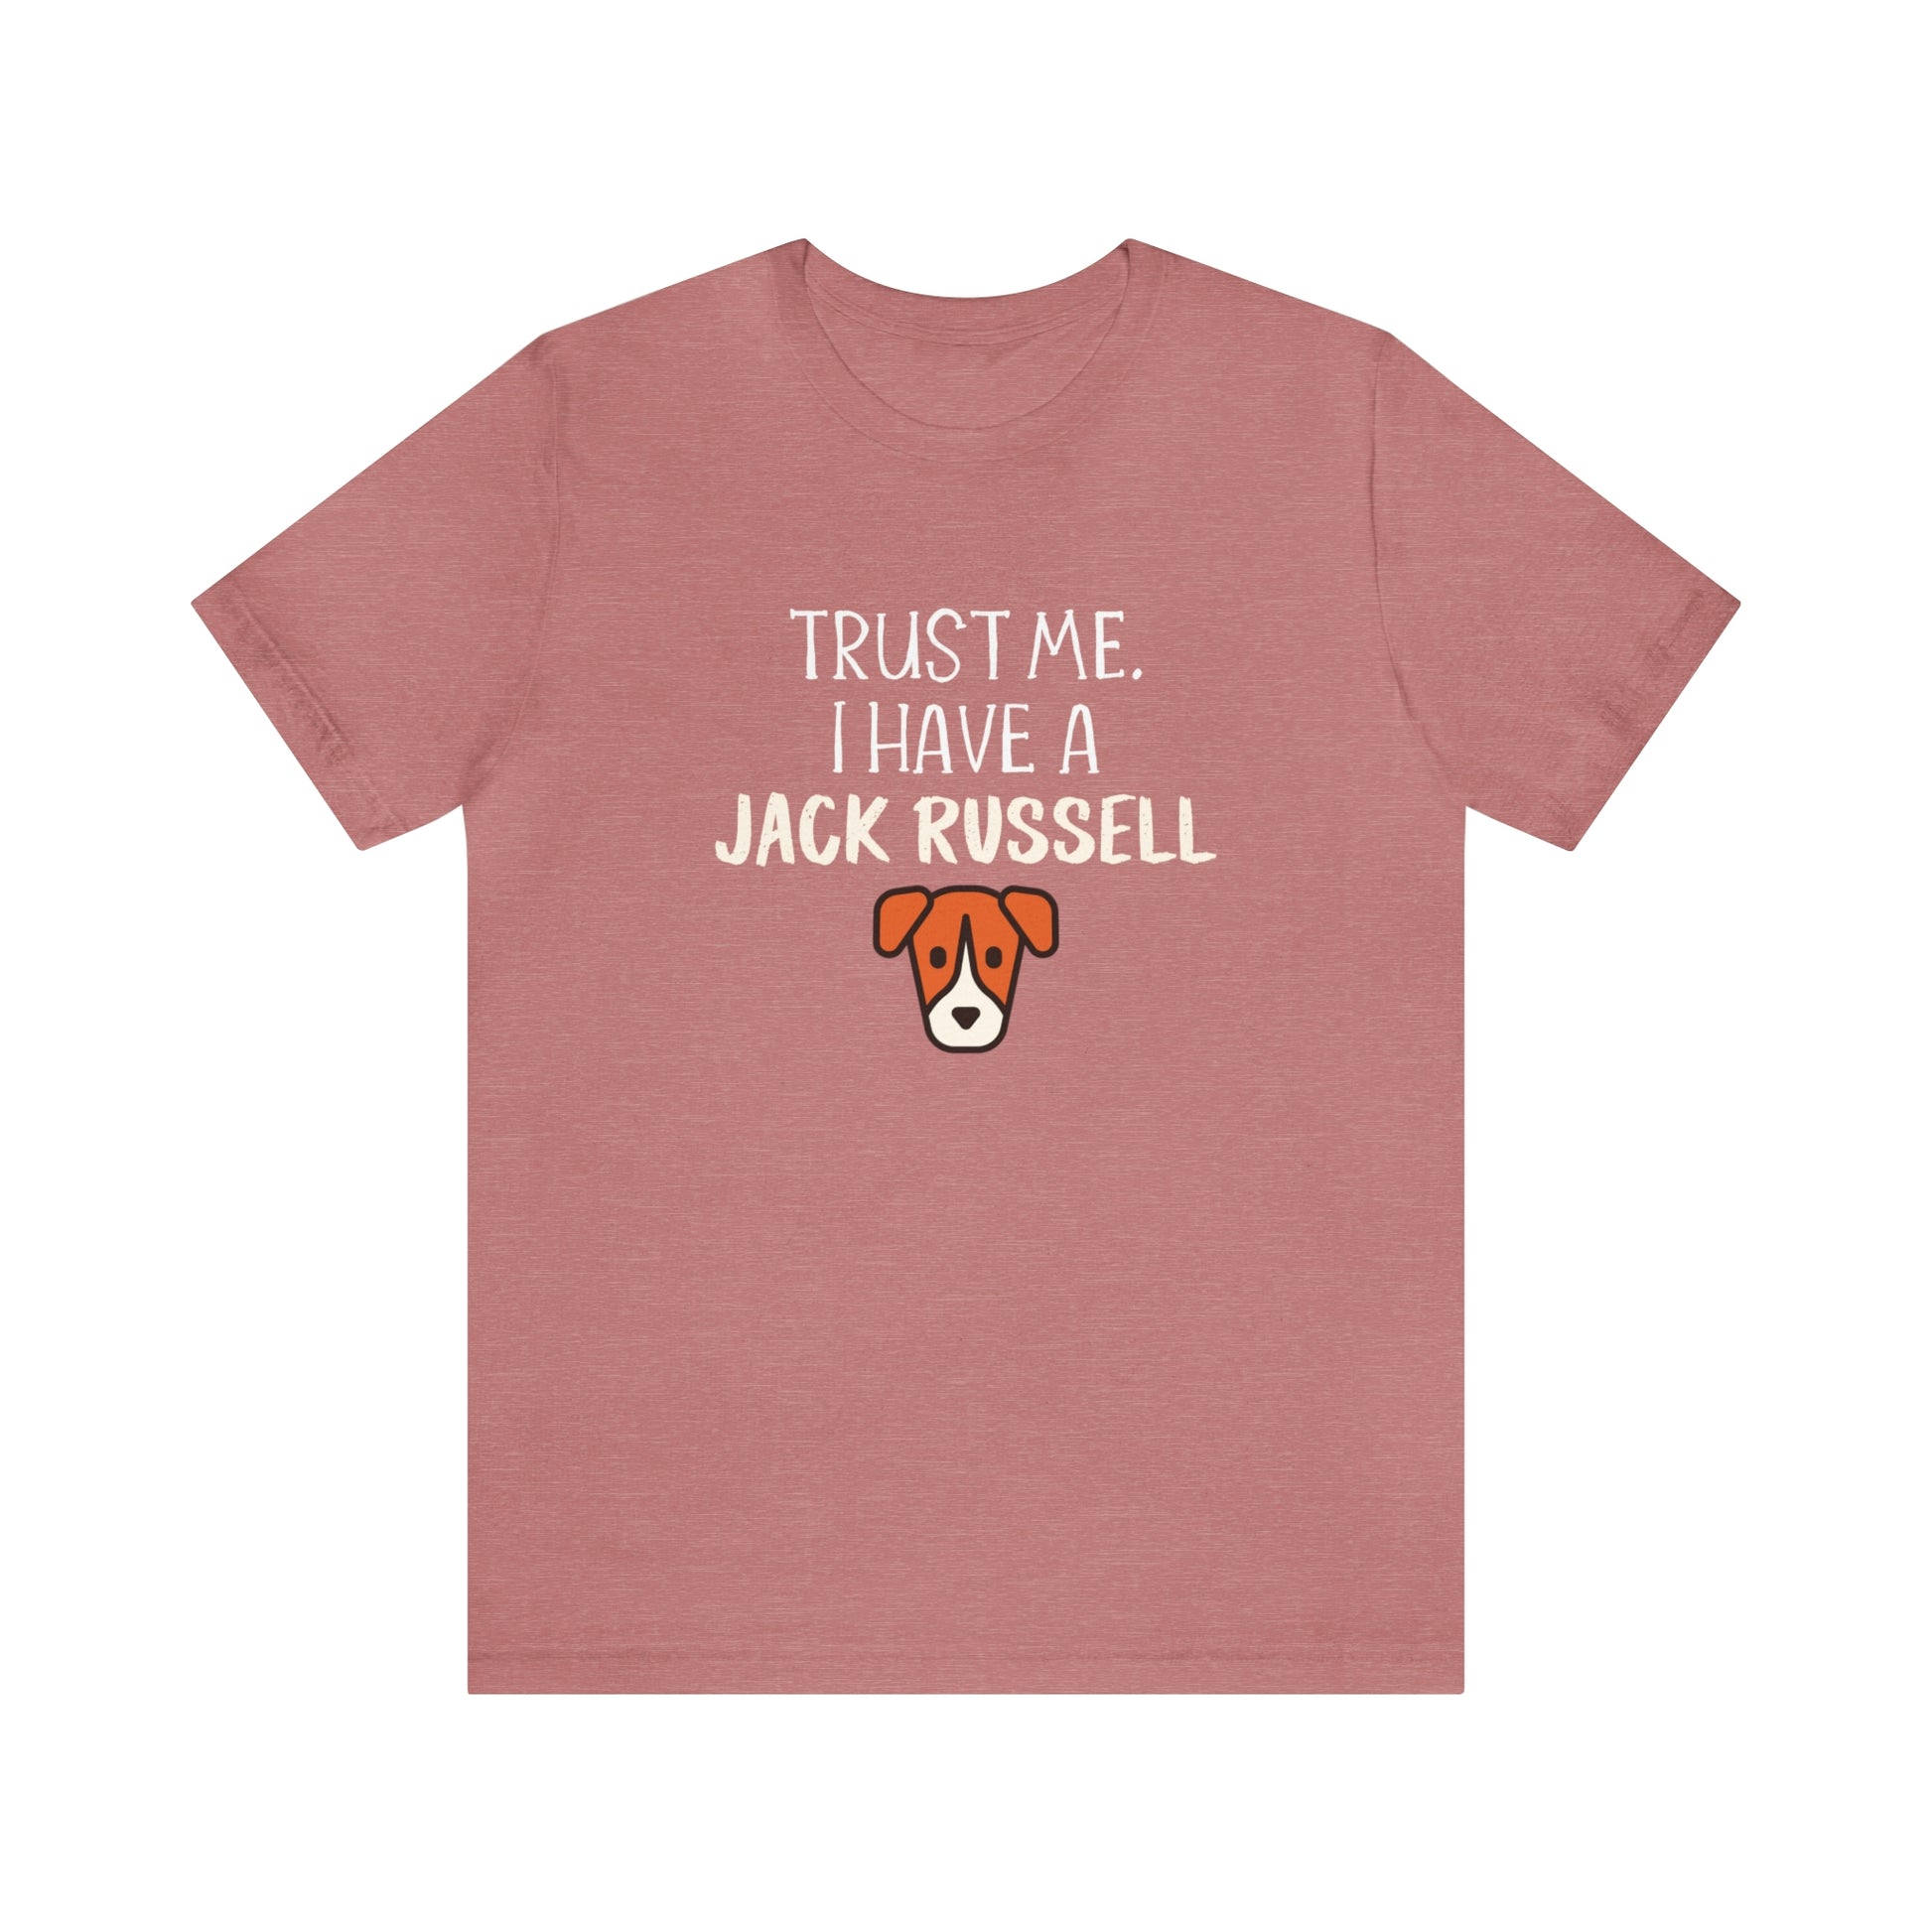 jack russell t shirt red